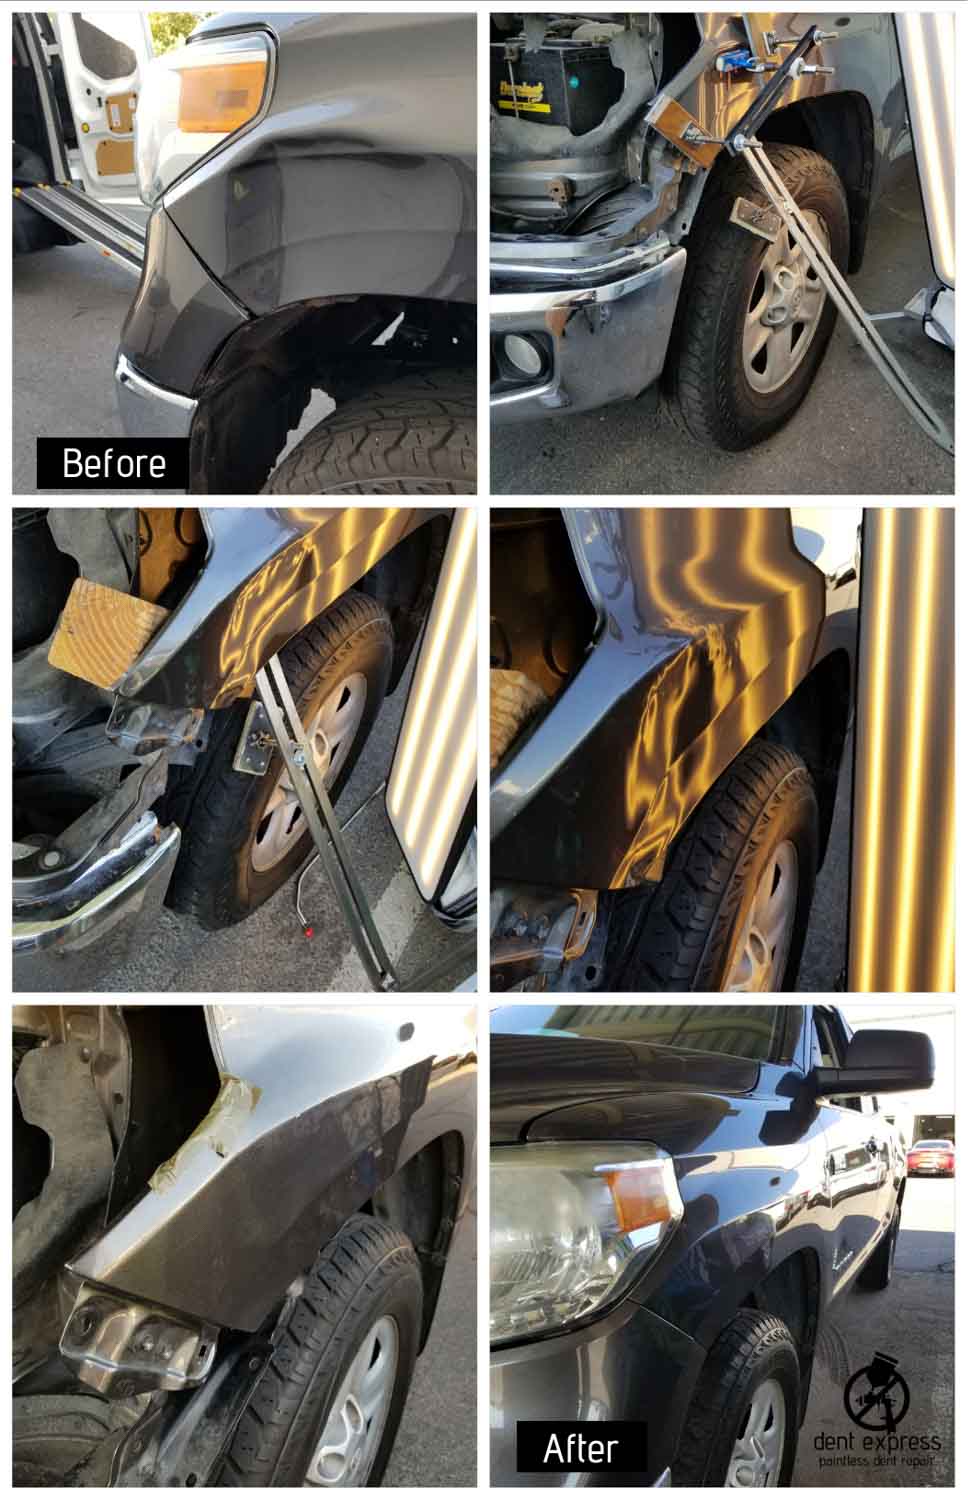 The repair process dent express uses to fix large dents on a vehicle